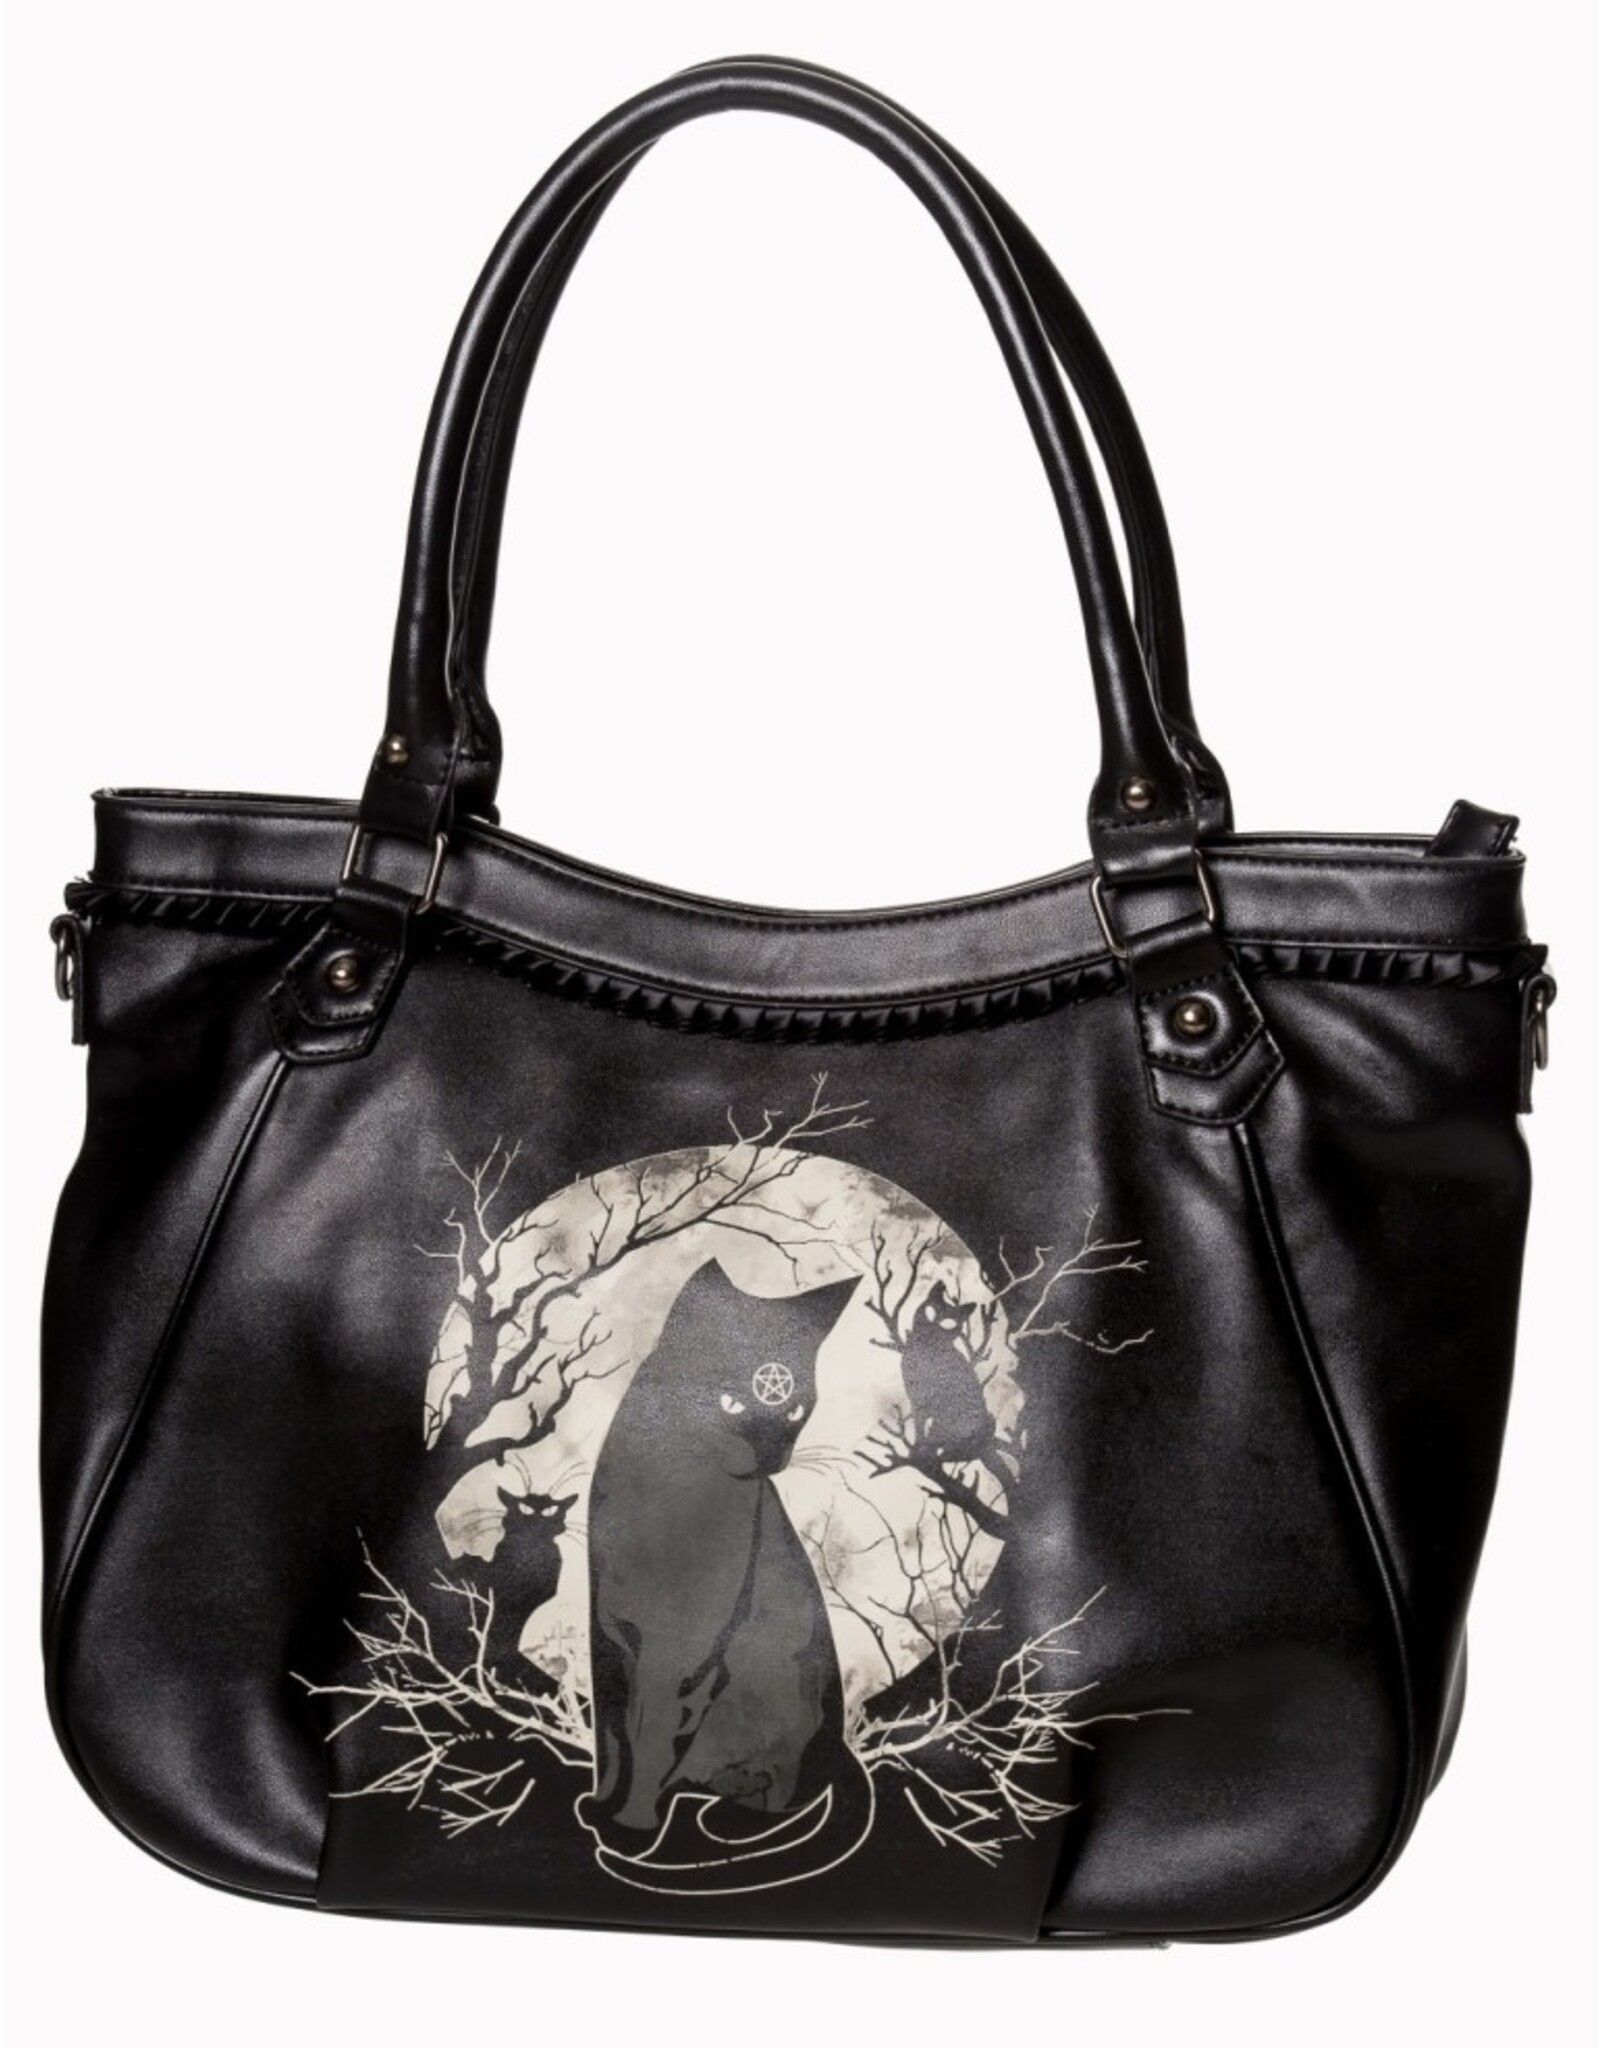 Banned Gothic Bags Steampunk Bags - Banned Hecate in Fool Moon Handbag with Black Cat